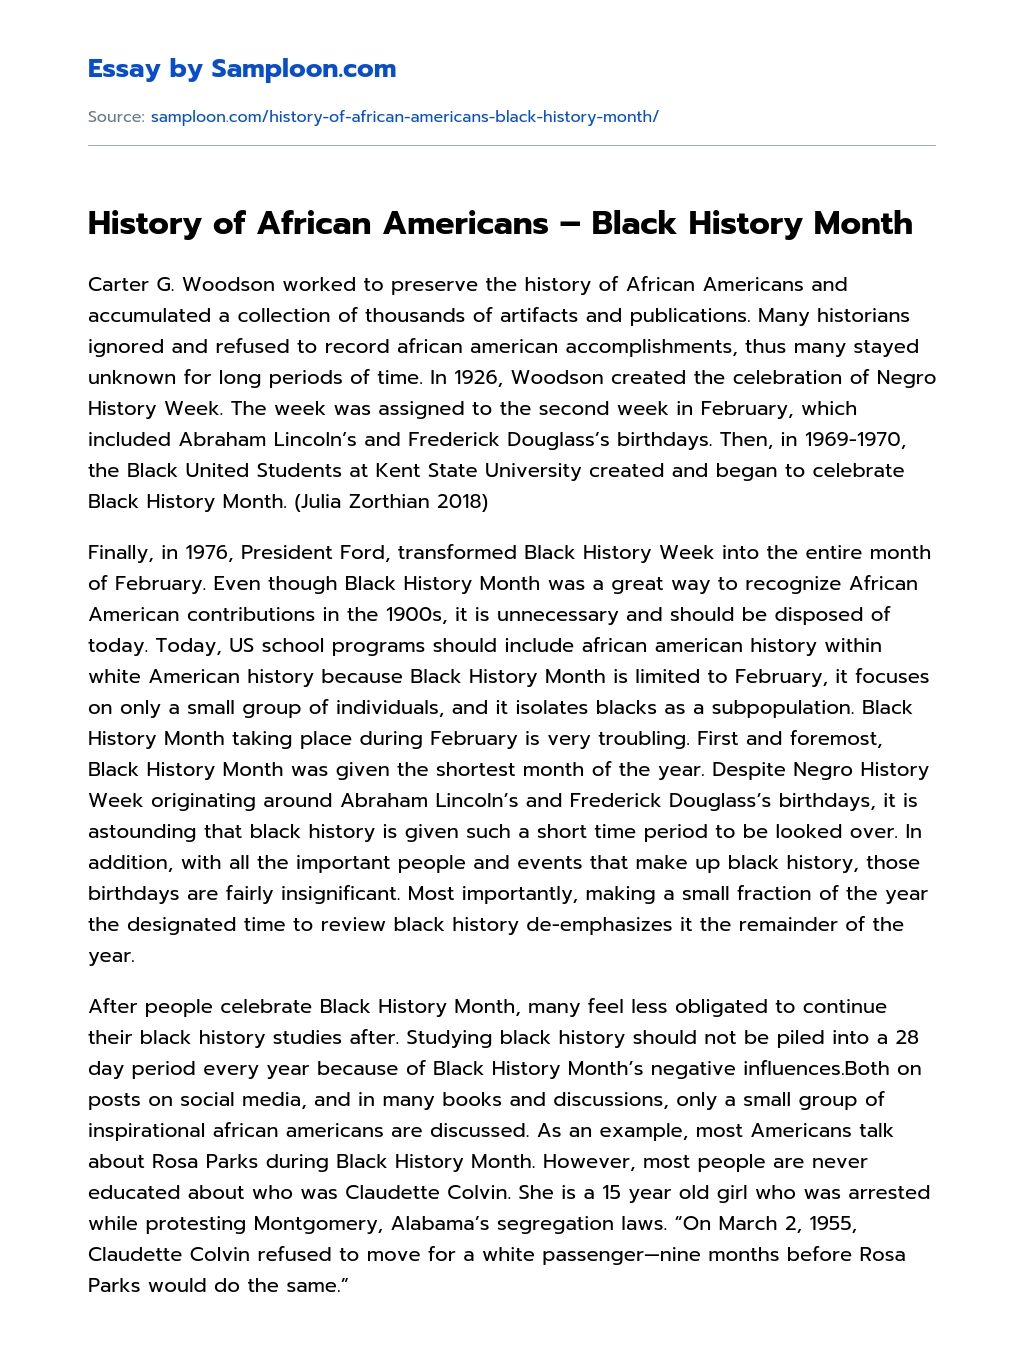 History of African Americans – Black History Month essay